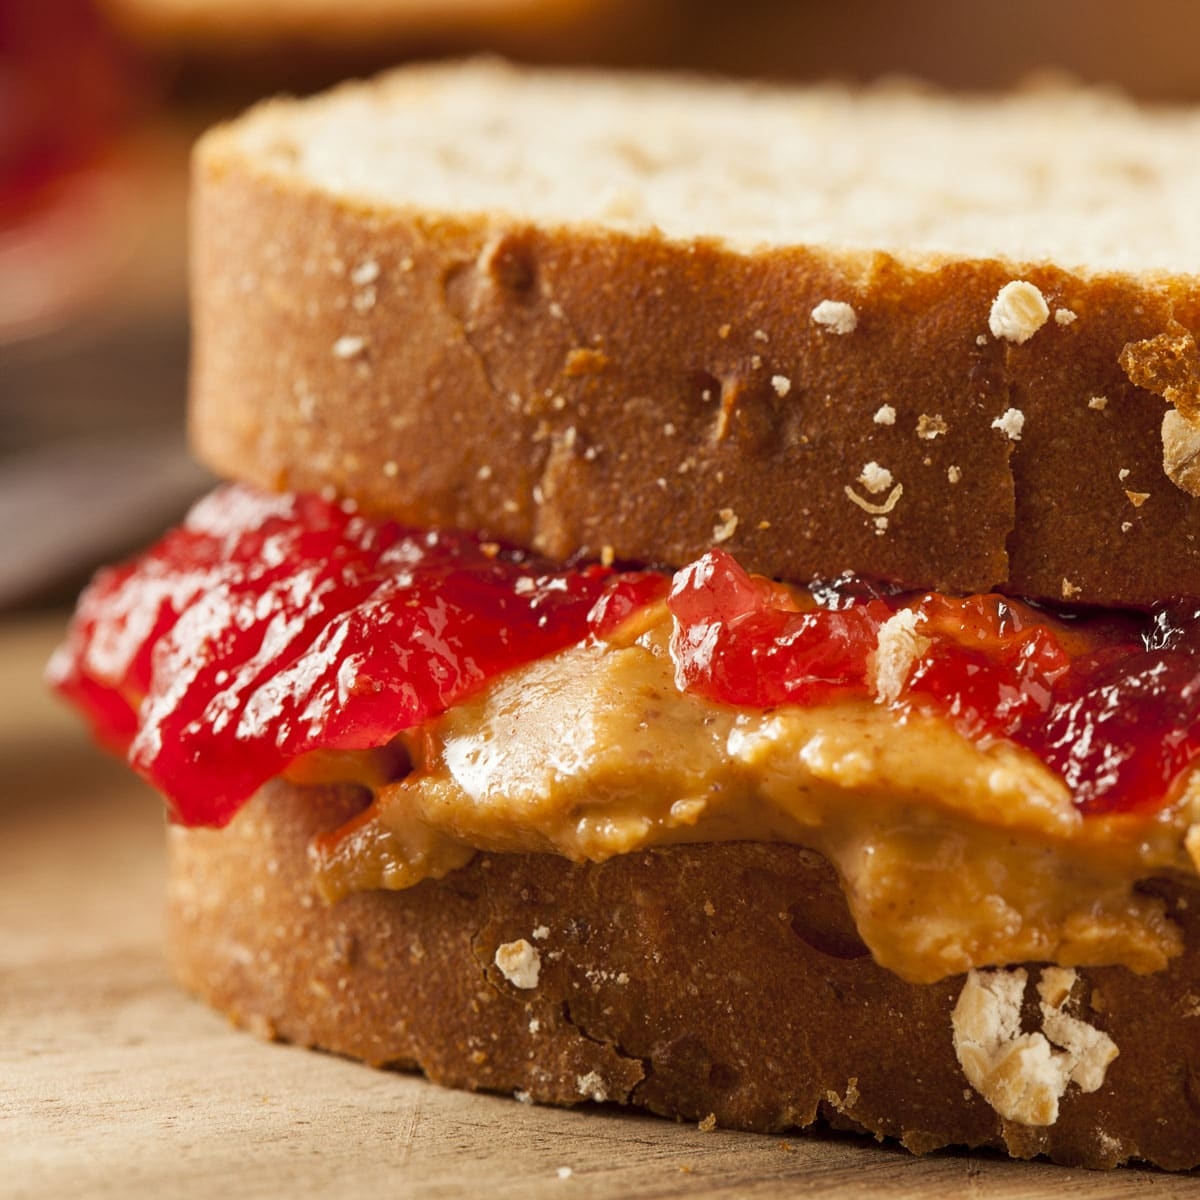 National Peanut Butter And Jelly Day April 2 2019 National Today